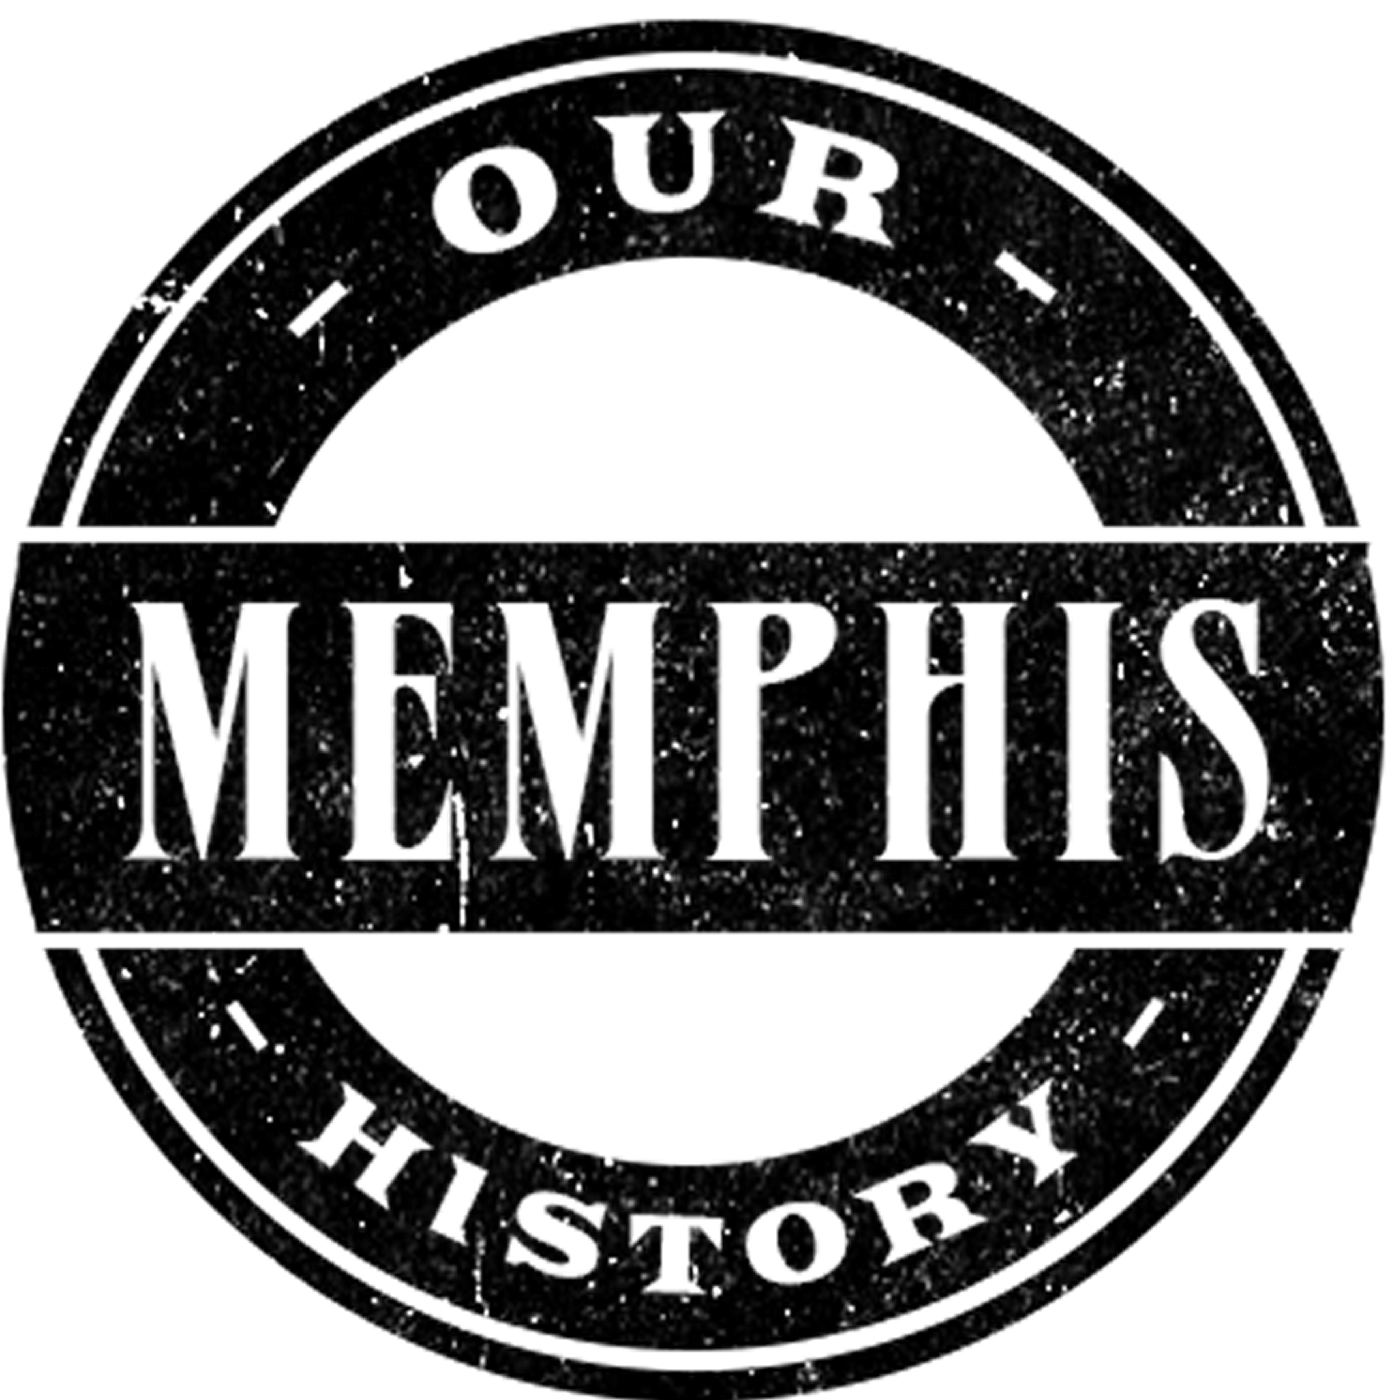 Our Memphis History